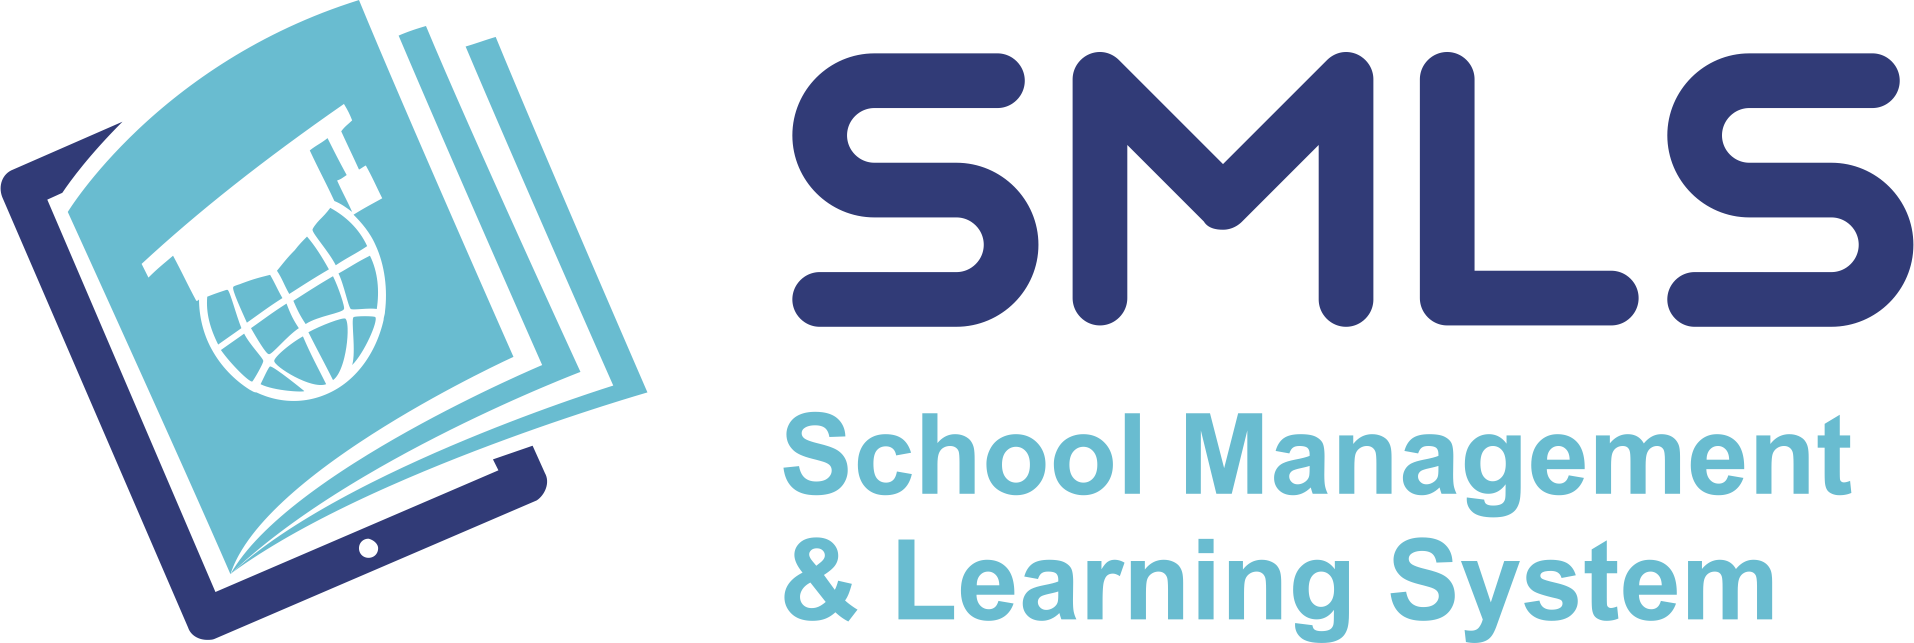 School Management & Learning System - Learning System Student Logo (1914x643)